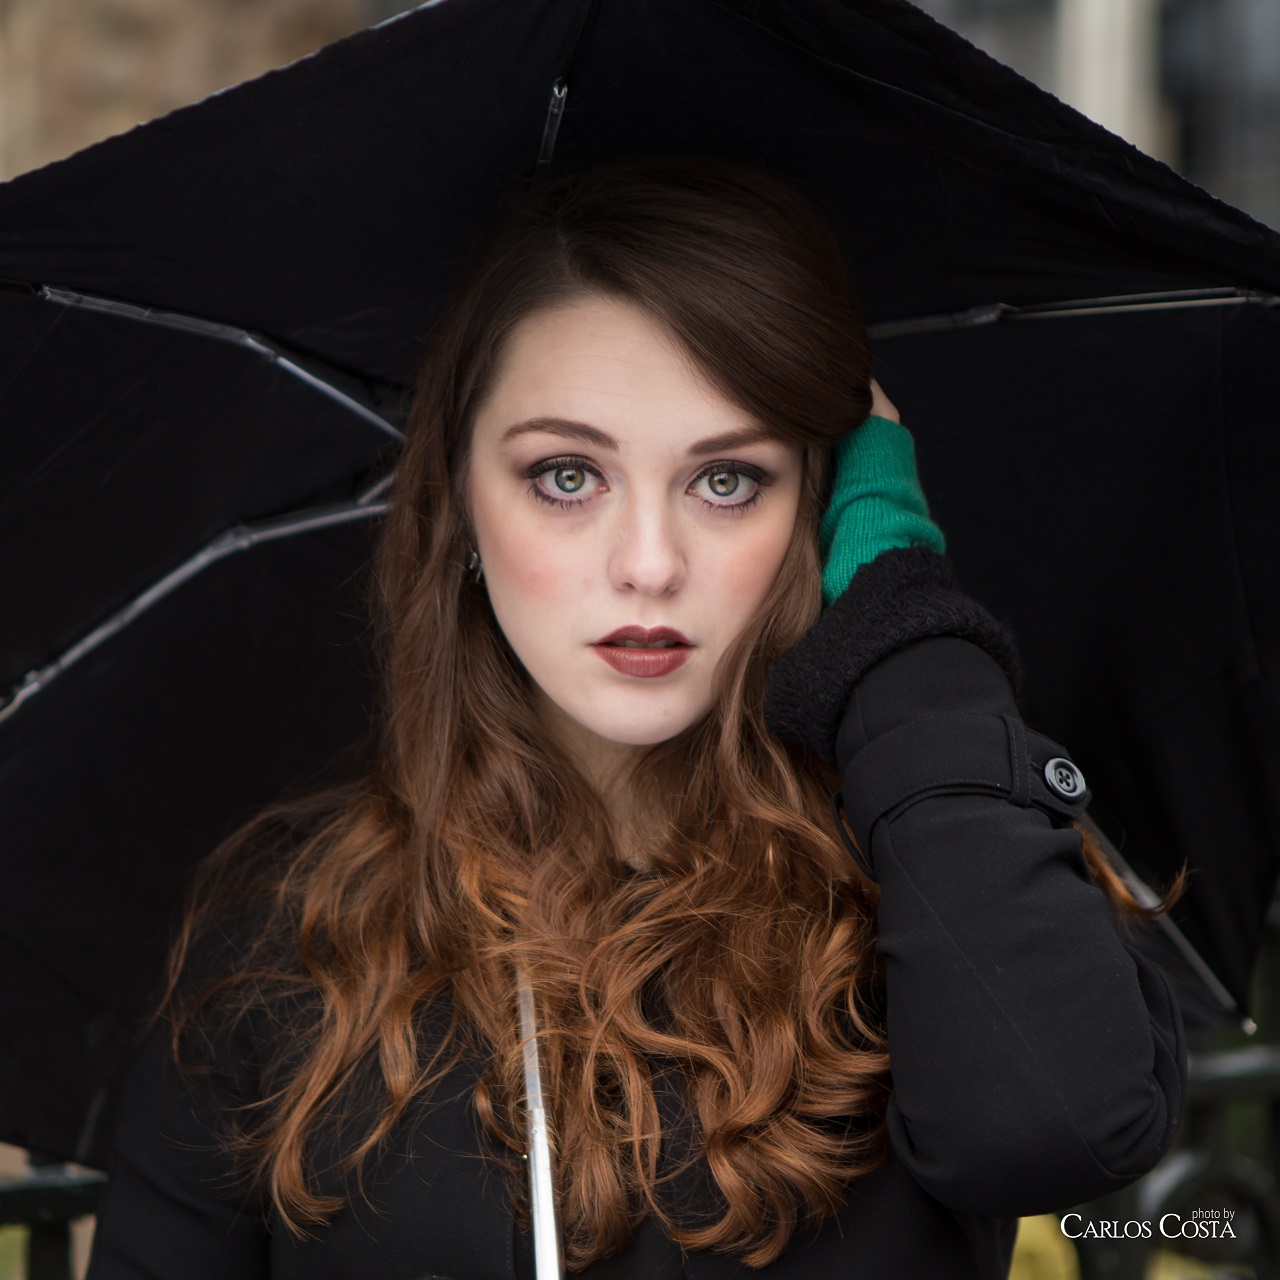 People 1280x1280 Imogen Dyer women brunette black coat women with umbrella one arm up pale looking at viewer umbrella long hair red lipstick model face women outdoors urban Carlos Costa